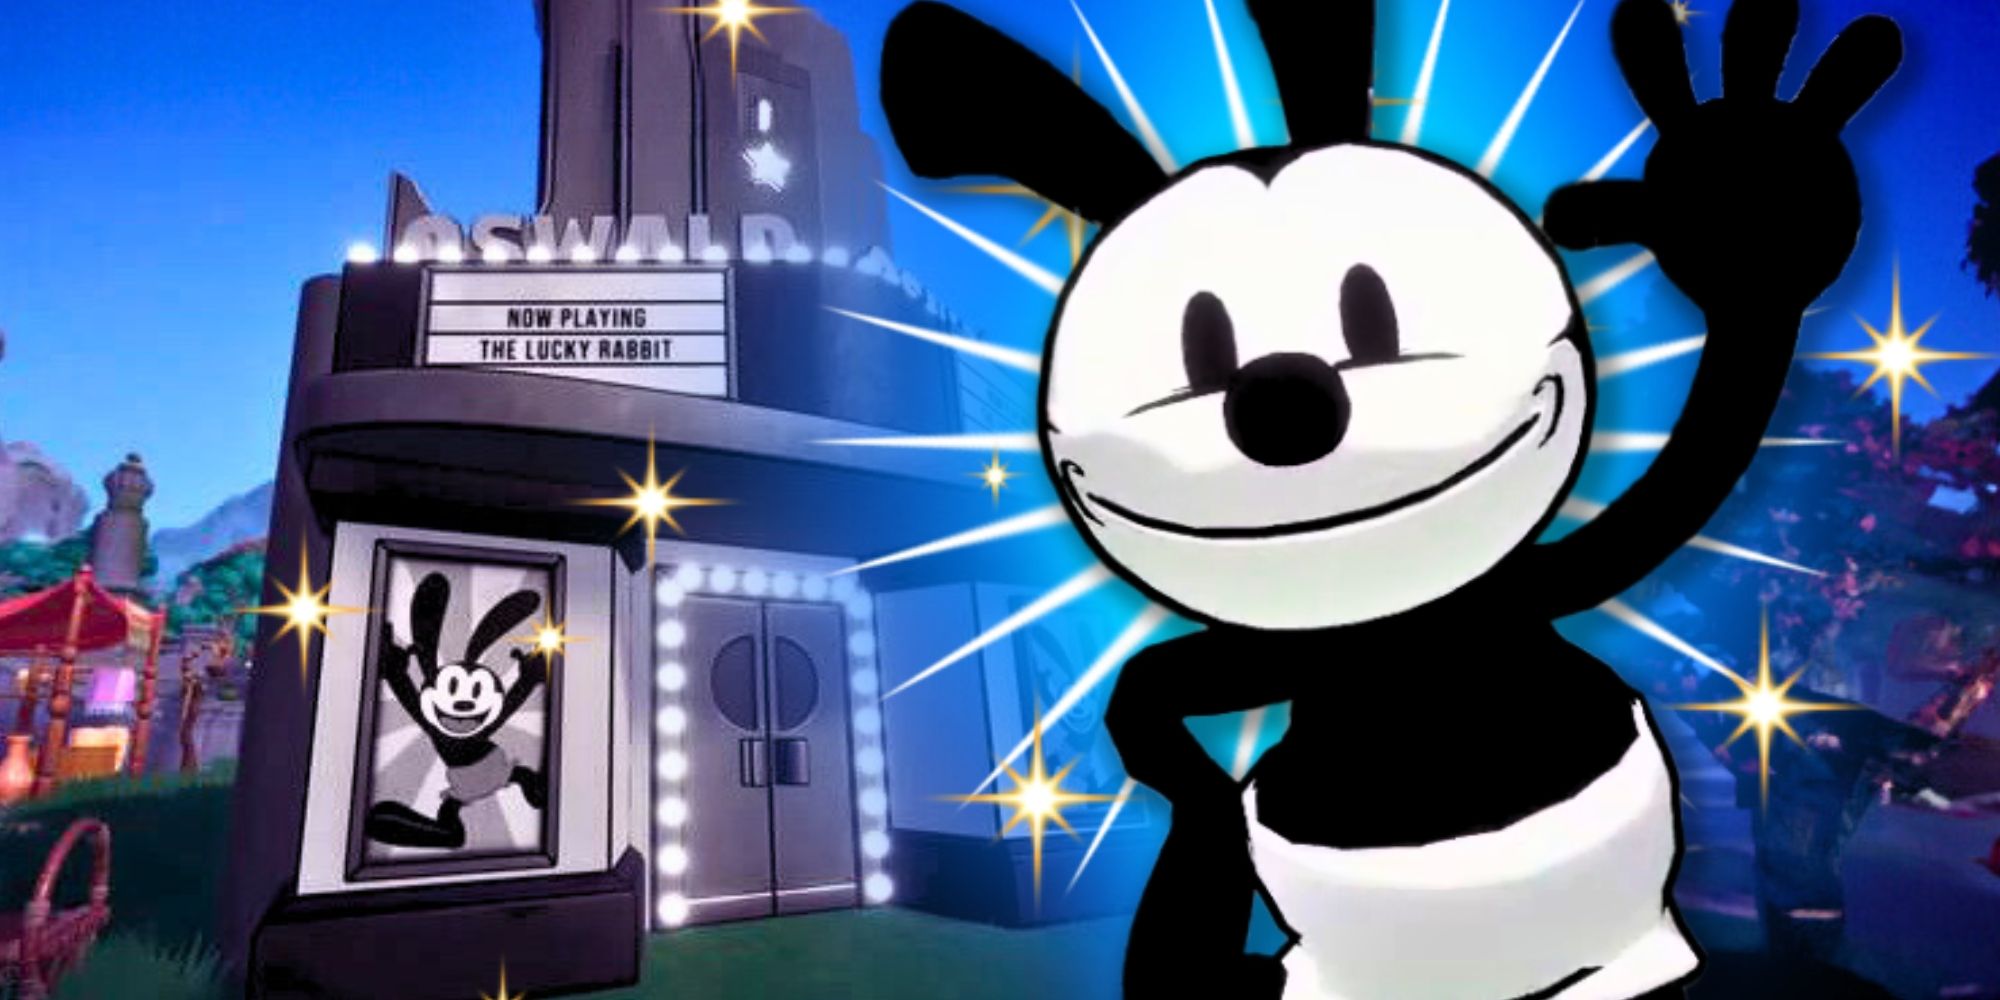 Oswald in front of his house in Disney Dreamlight Valley